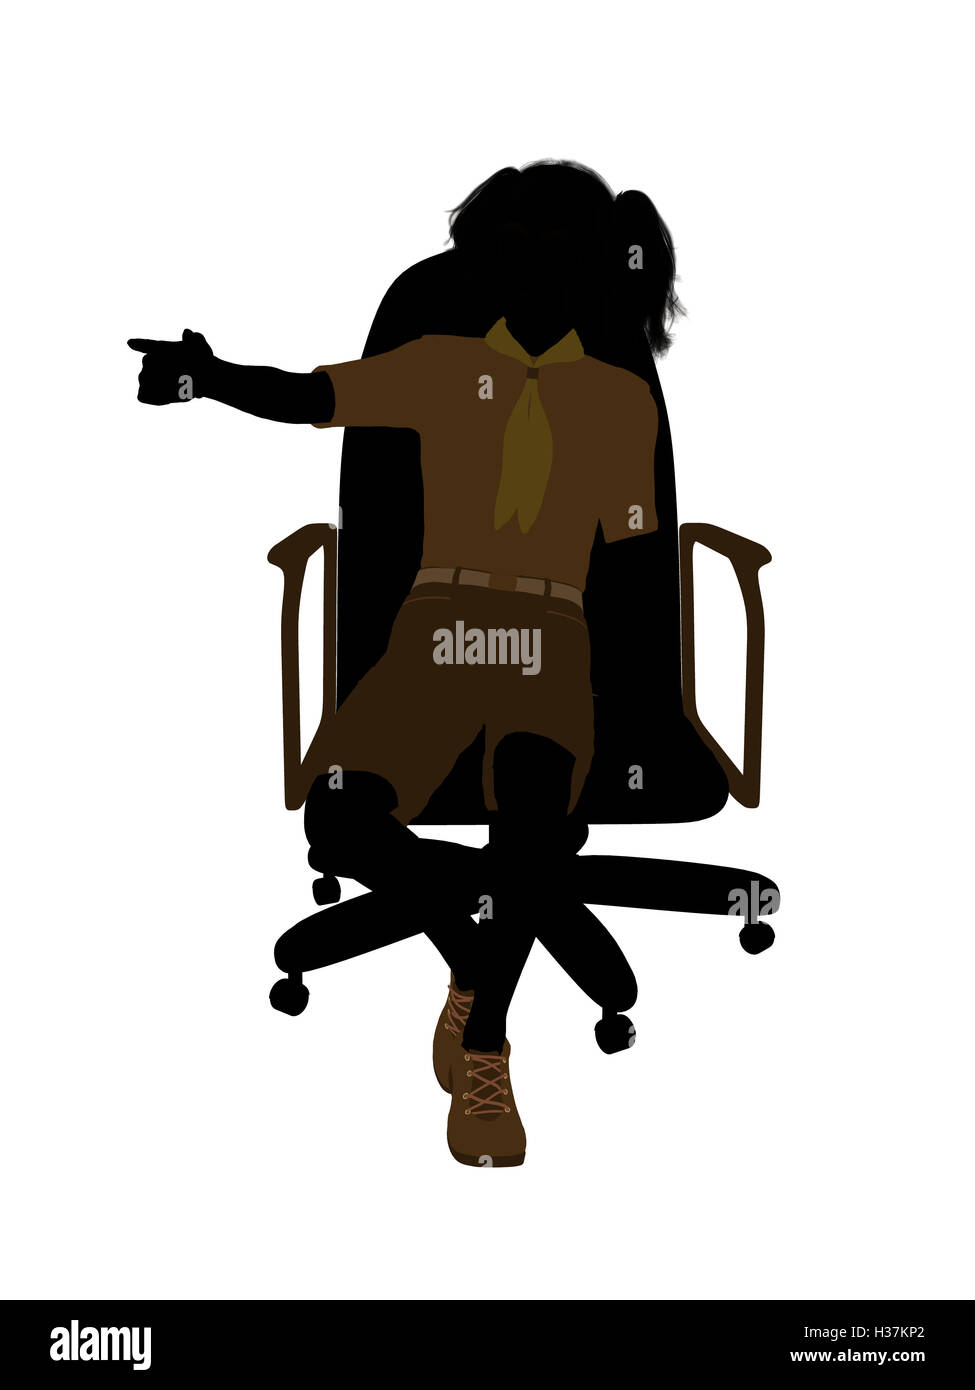 Girl Scout Sitting On A Chair Illustration Silhouette Stock Photo